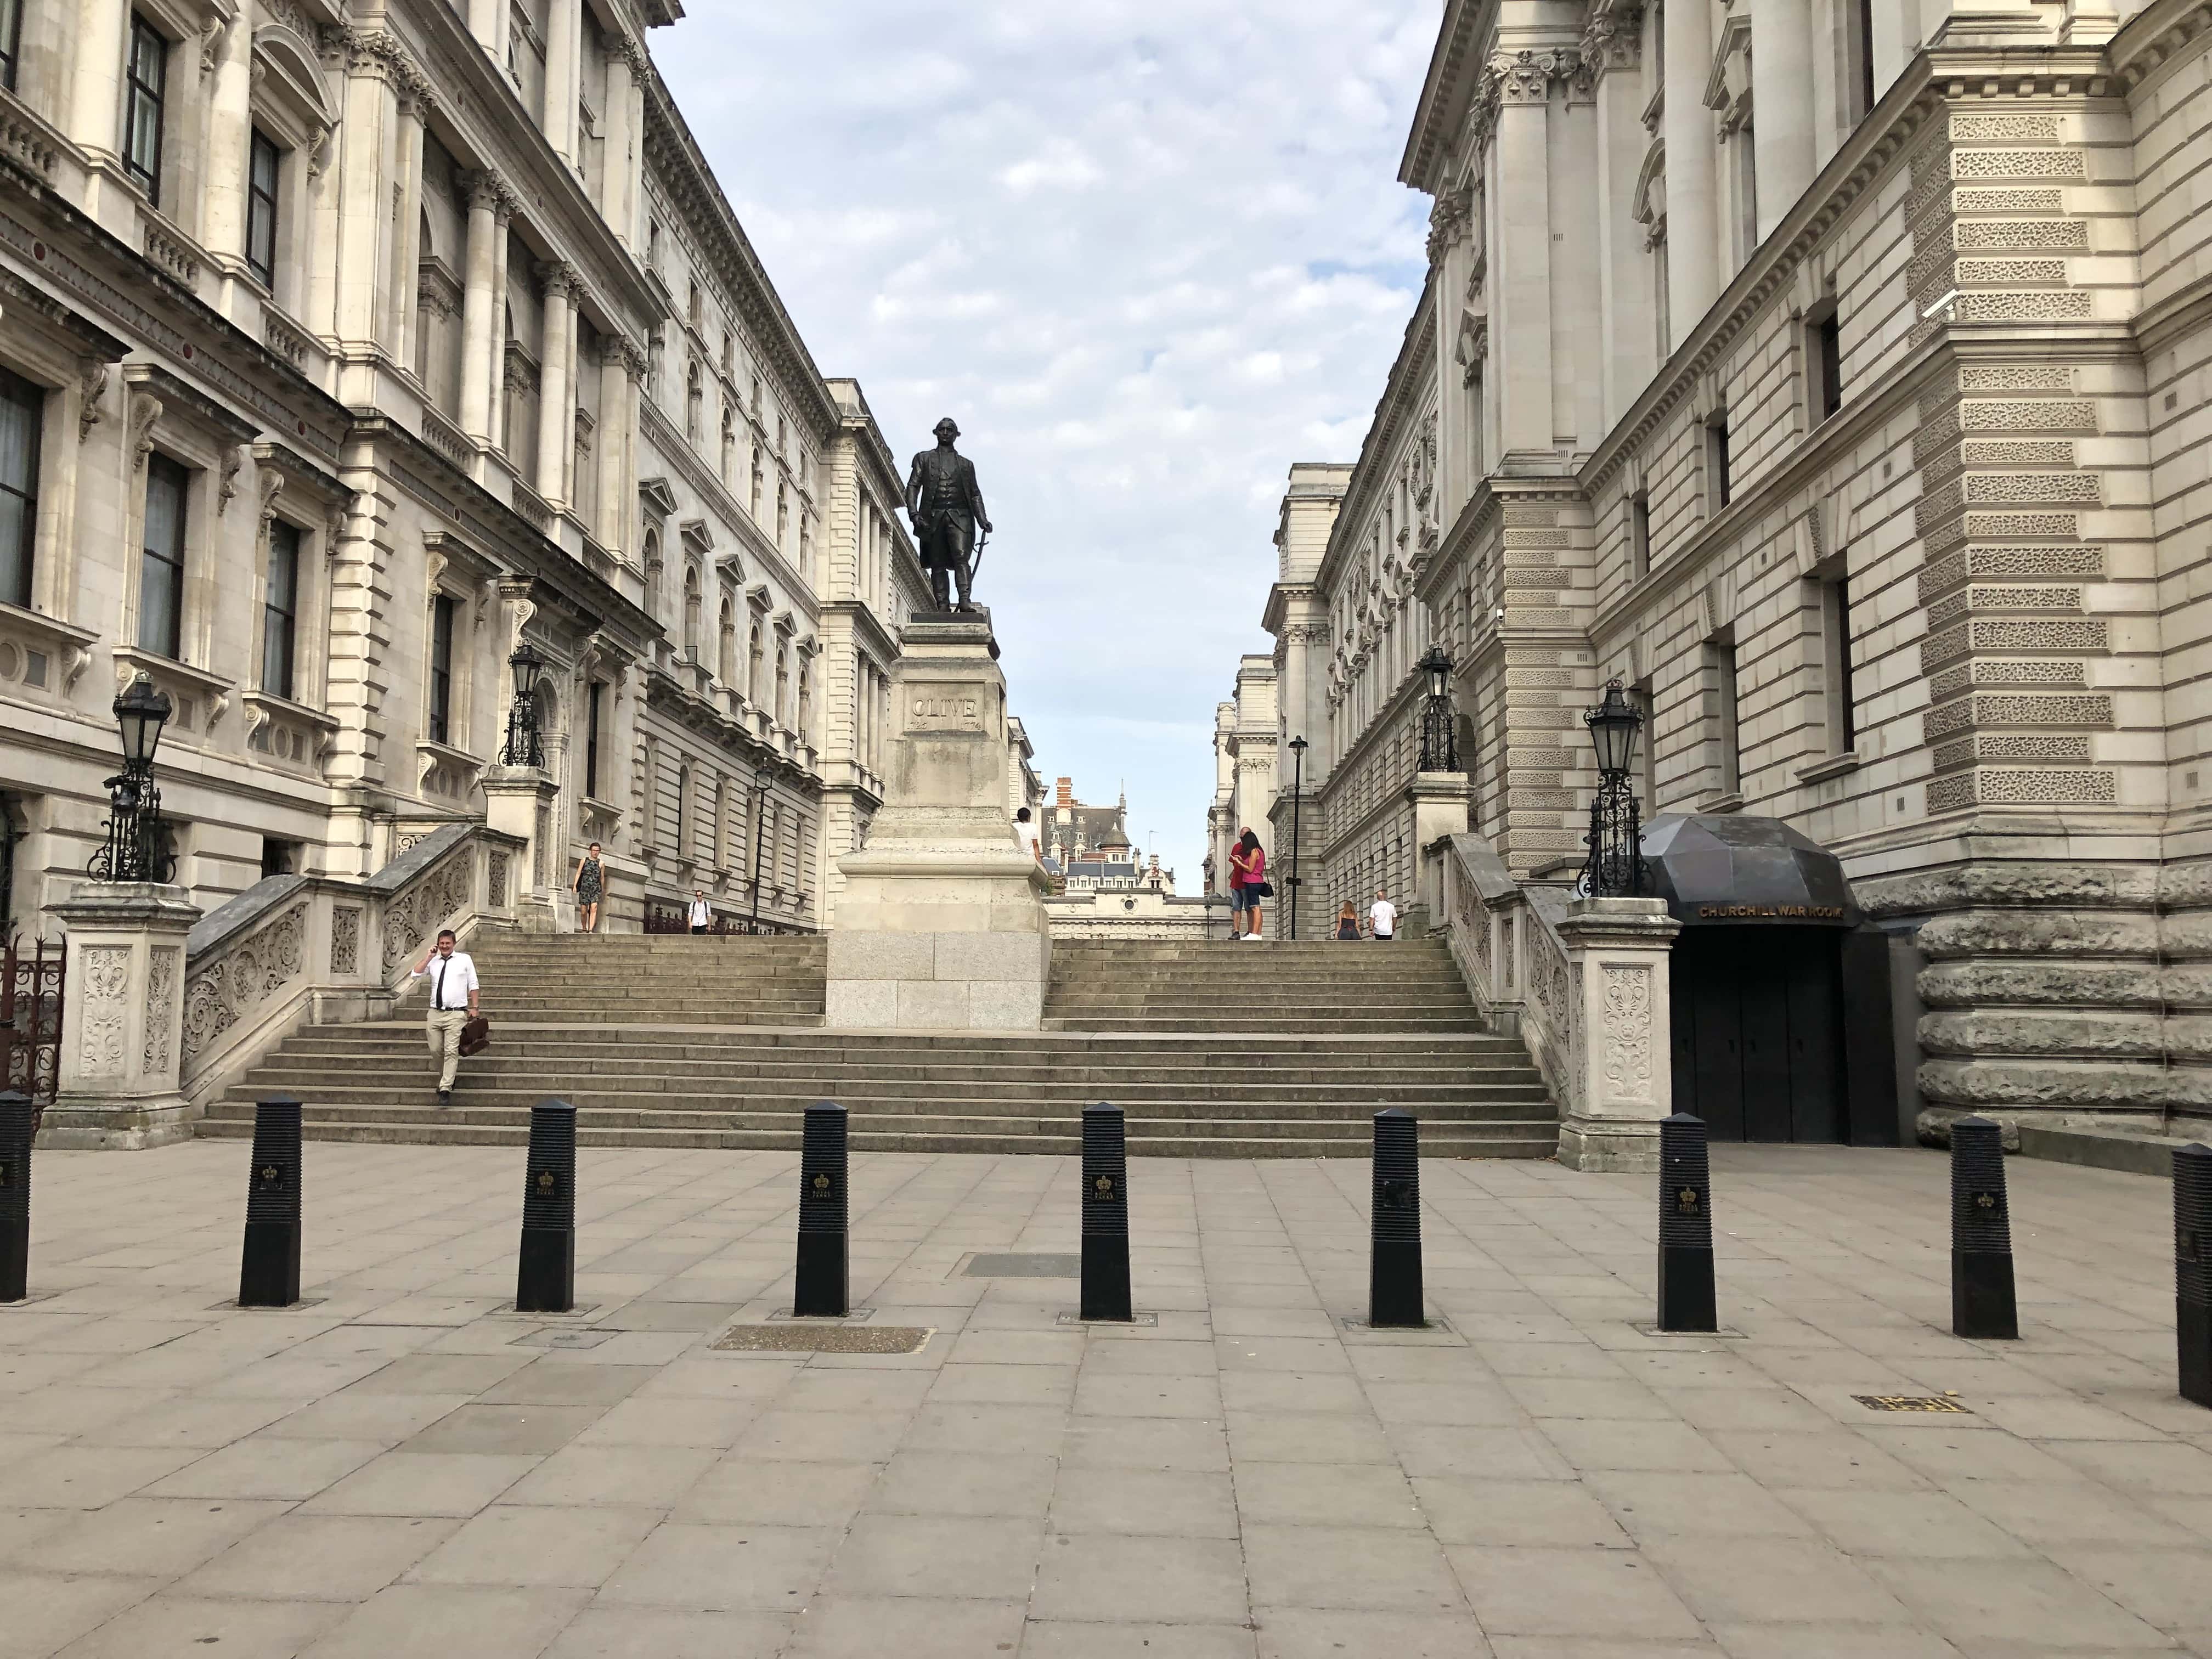 Clive Steps in Westminster, London, England